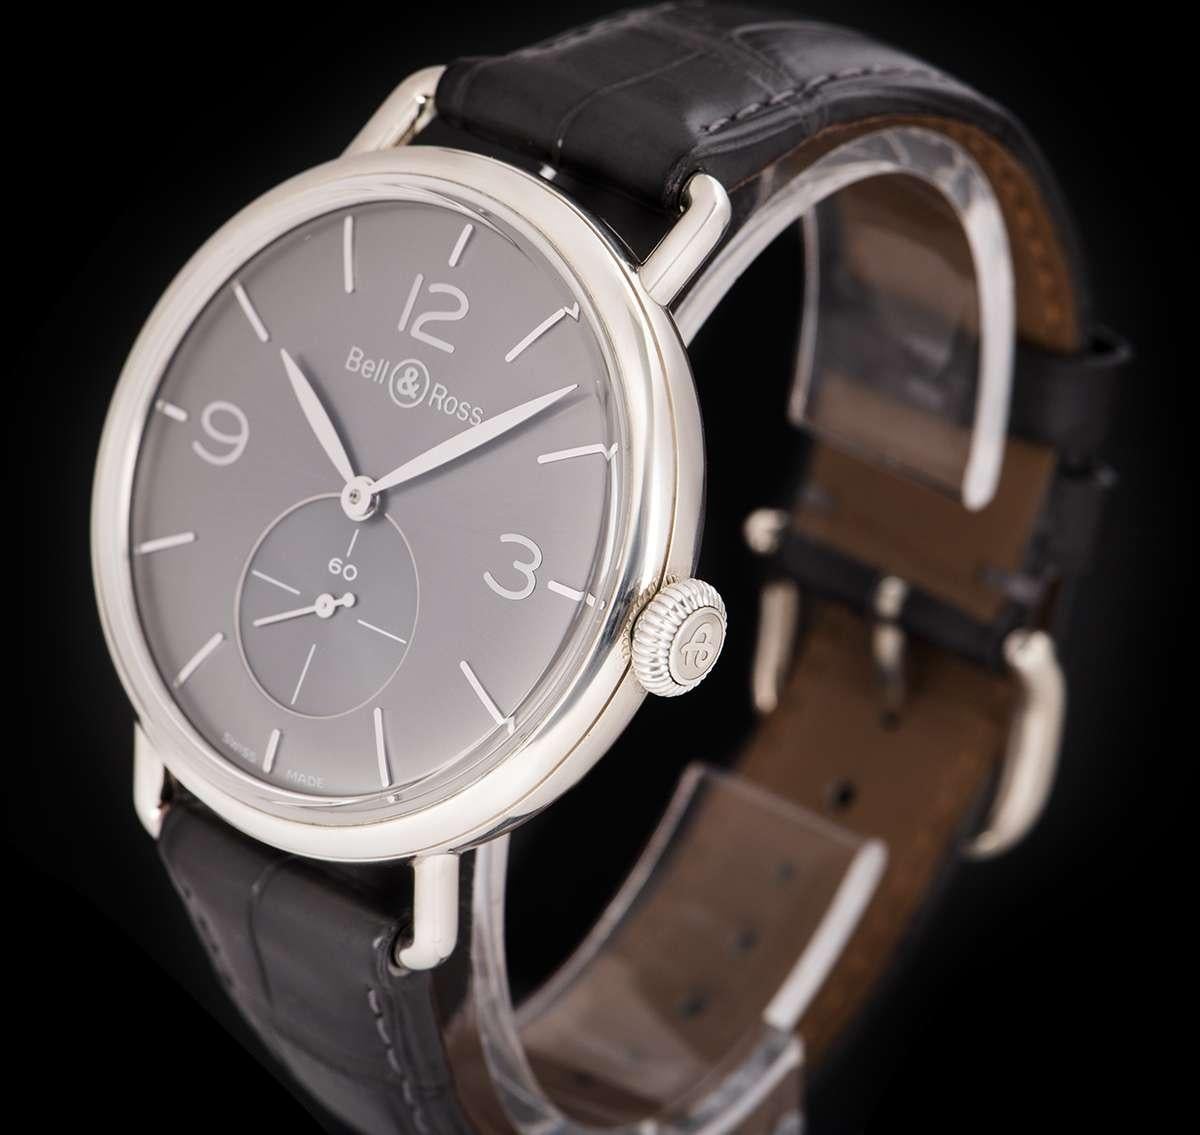 An Argentium Silver Vintage Gents Wristwatch, silver dial with applied hour markers and applied arabic numbers 3, 9 and 12, small seconds at 6 0'clock, a fixed argentium silver bezel, an original grey leather strap with an original argentium silver